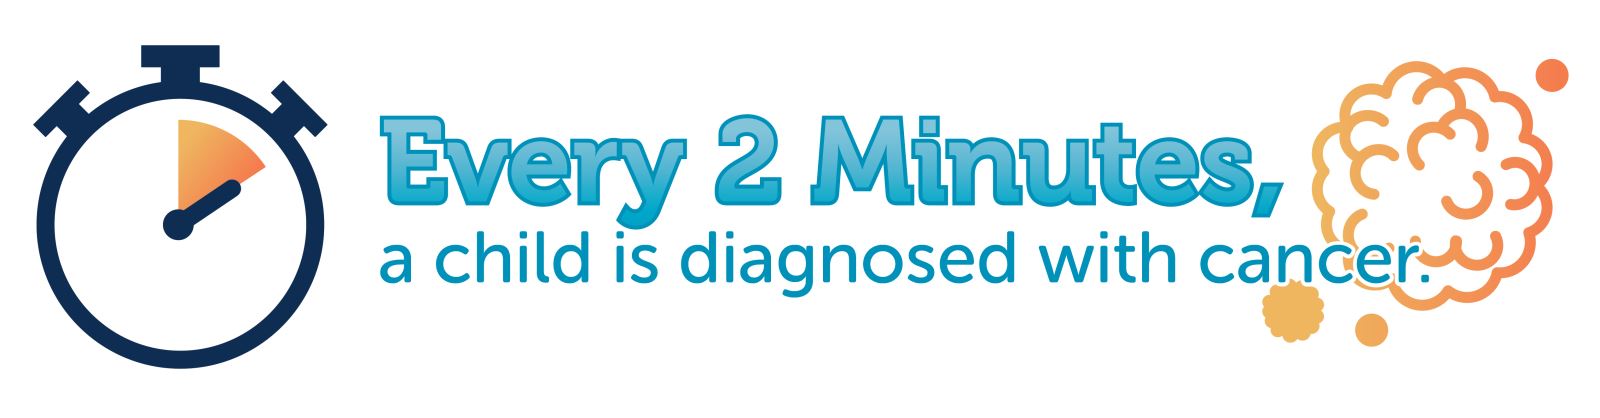 Every two minutes, a child is diagnosed with cancer graphic